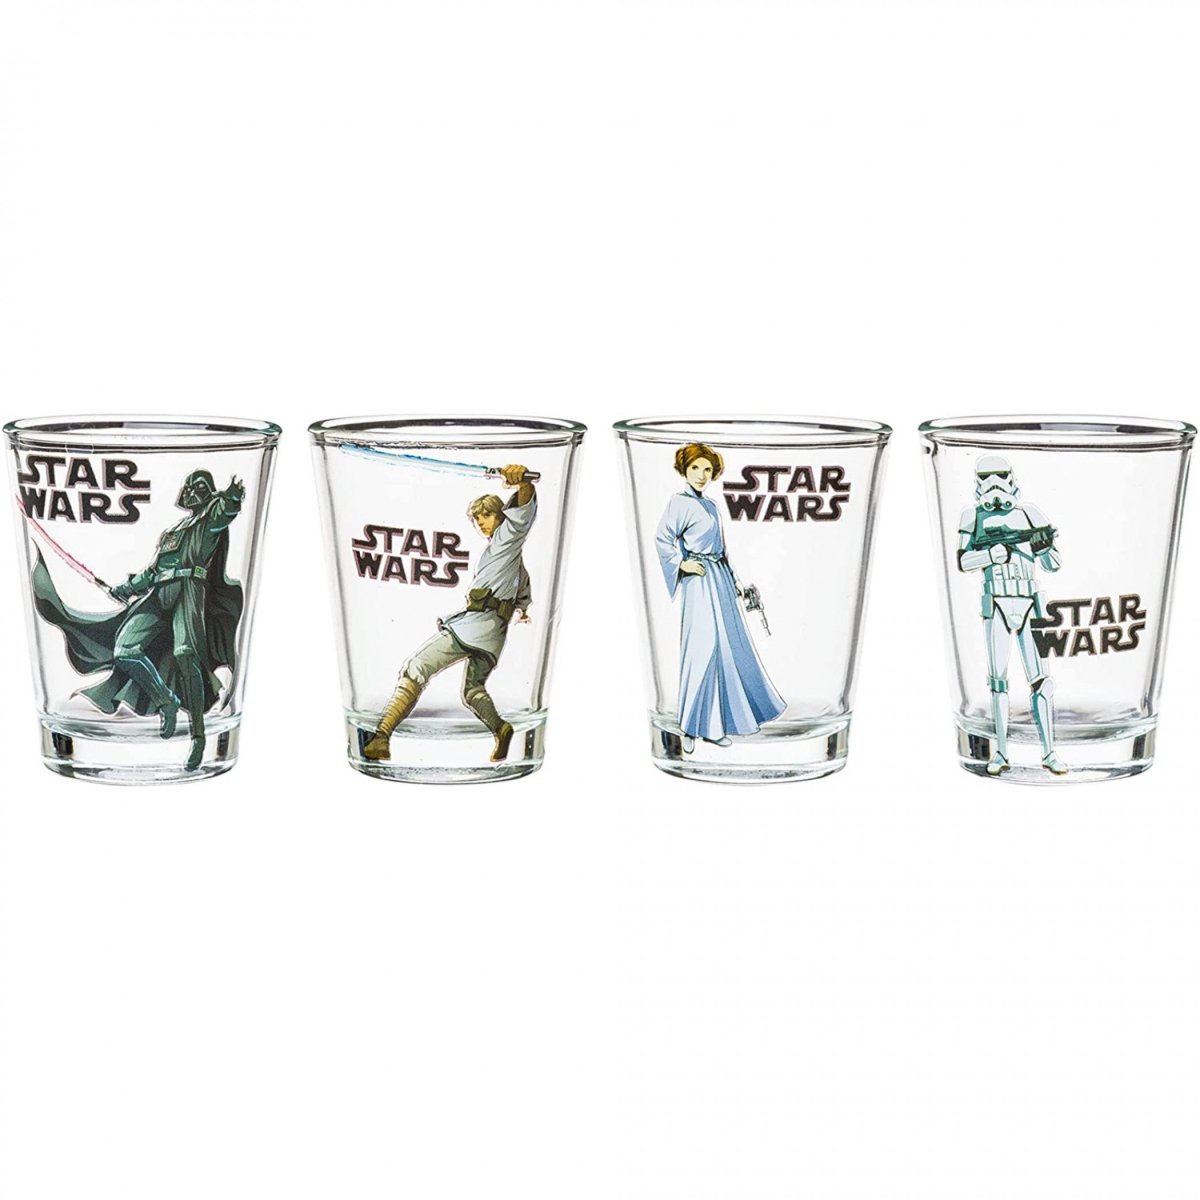 Picture of Star Wars 850418 Star Wars Original Trilogy Characters Shot Glass Set - 4 Piece